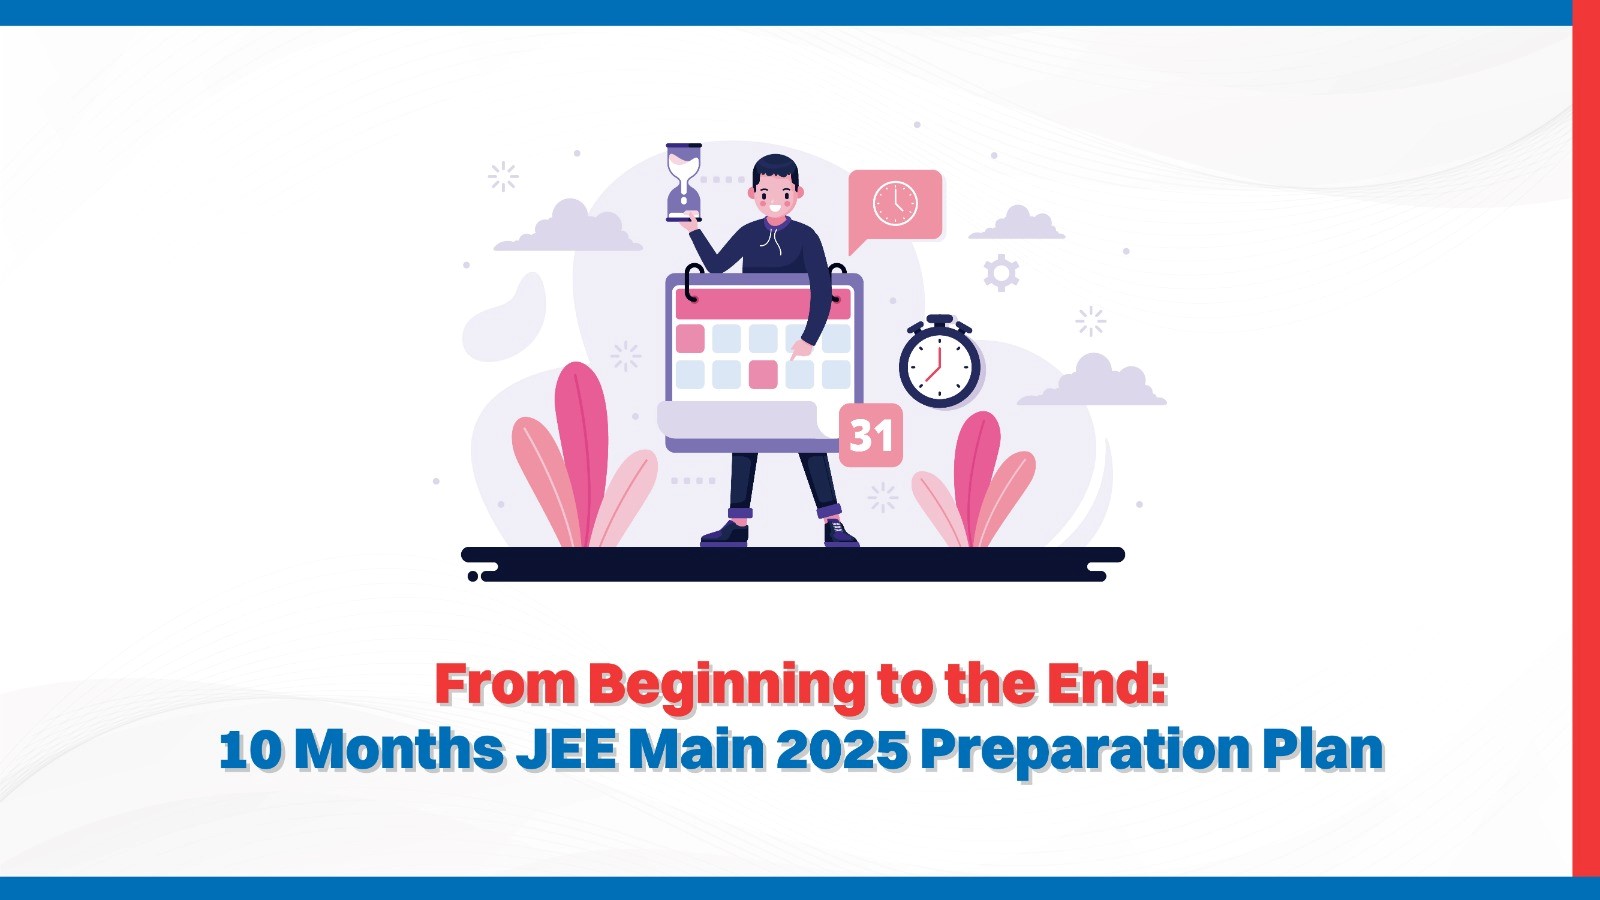 From Beginning to the End 10 Months JEE Main 2025 Preparation Plan.jpg